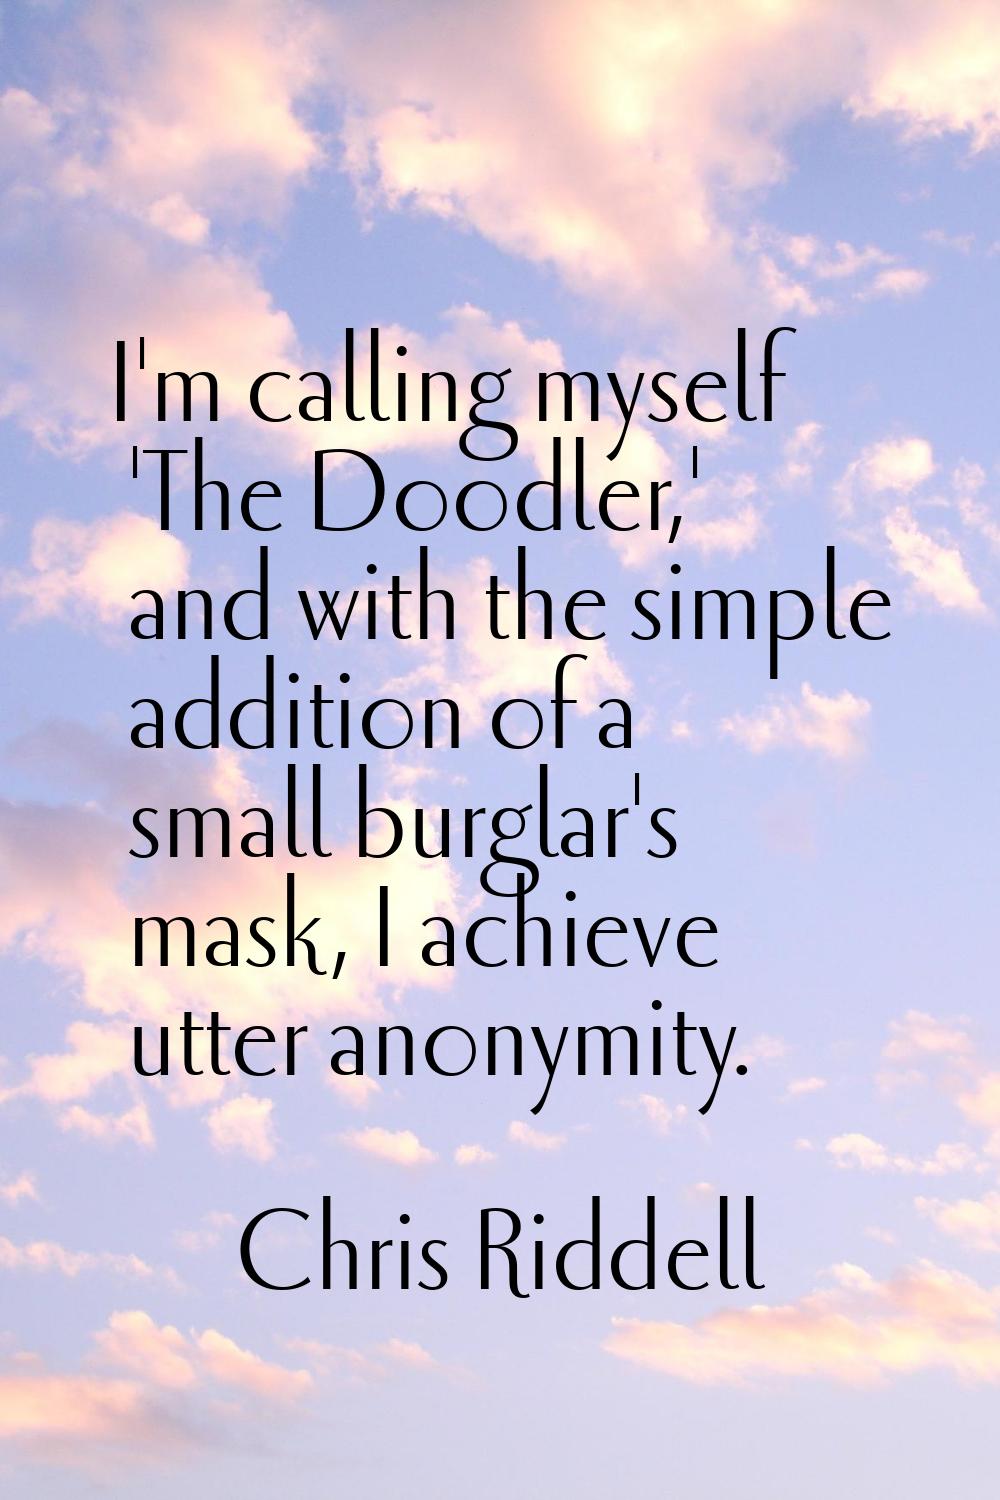 I'm calling myself 'The Doodler,' and with the simple addition of a small burglar's mask, I achieve